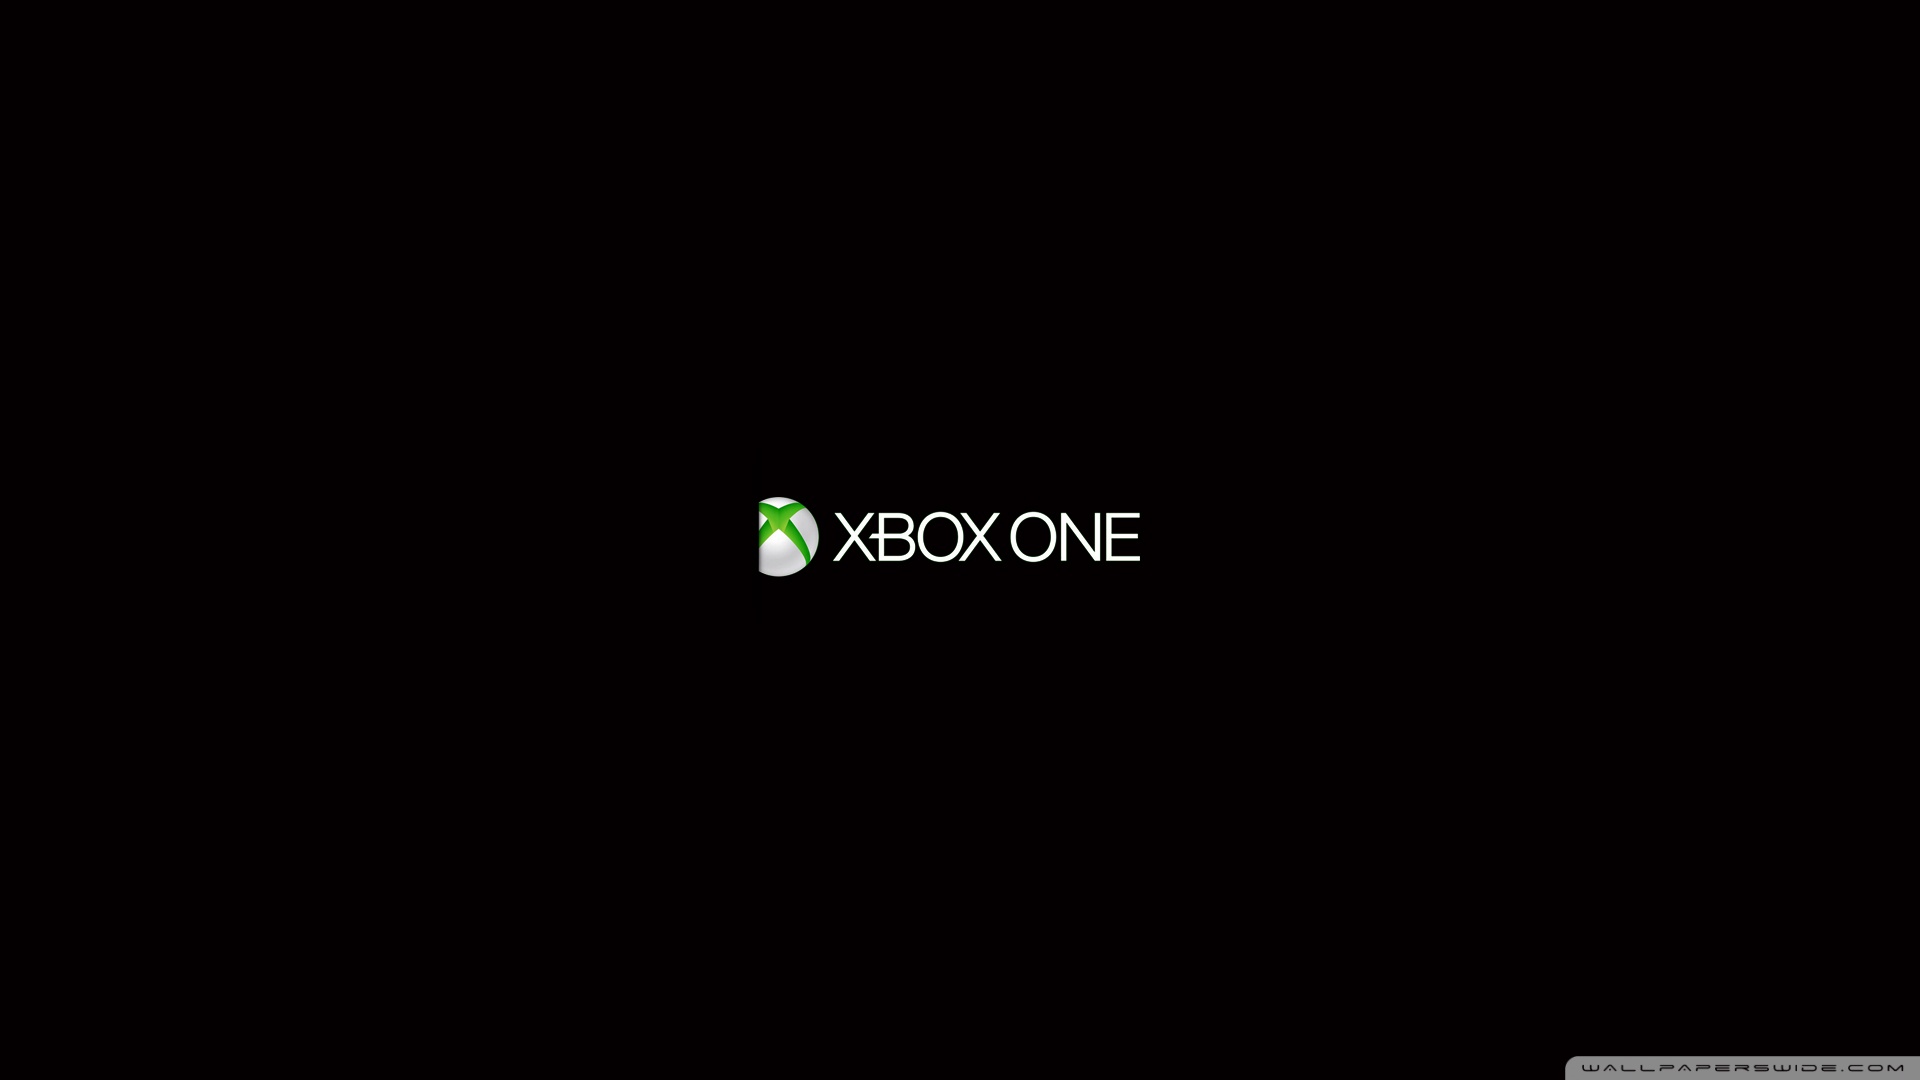 Xbox One Wallpapers In 1080p Xbox One Wallpaper 1080p Viewin